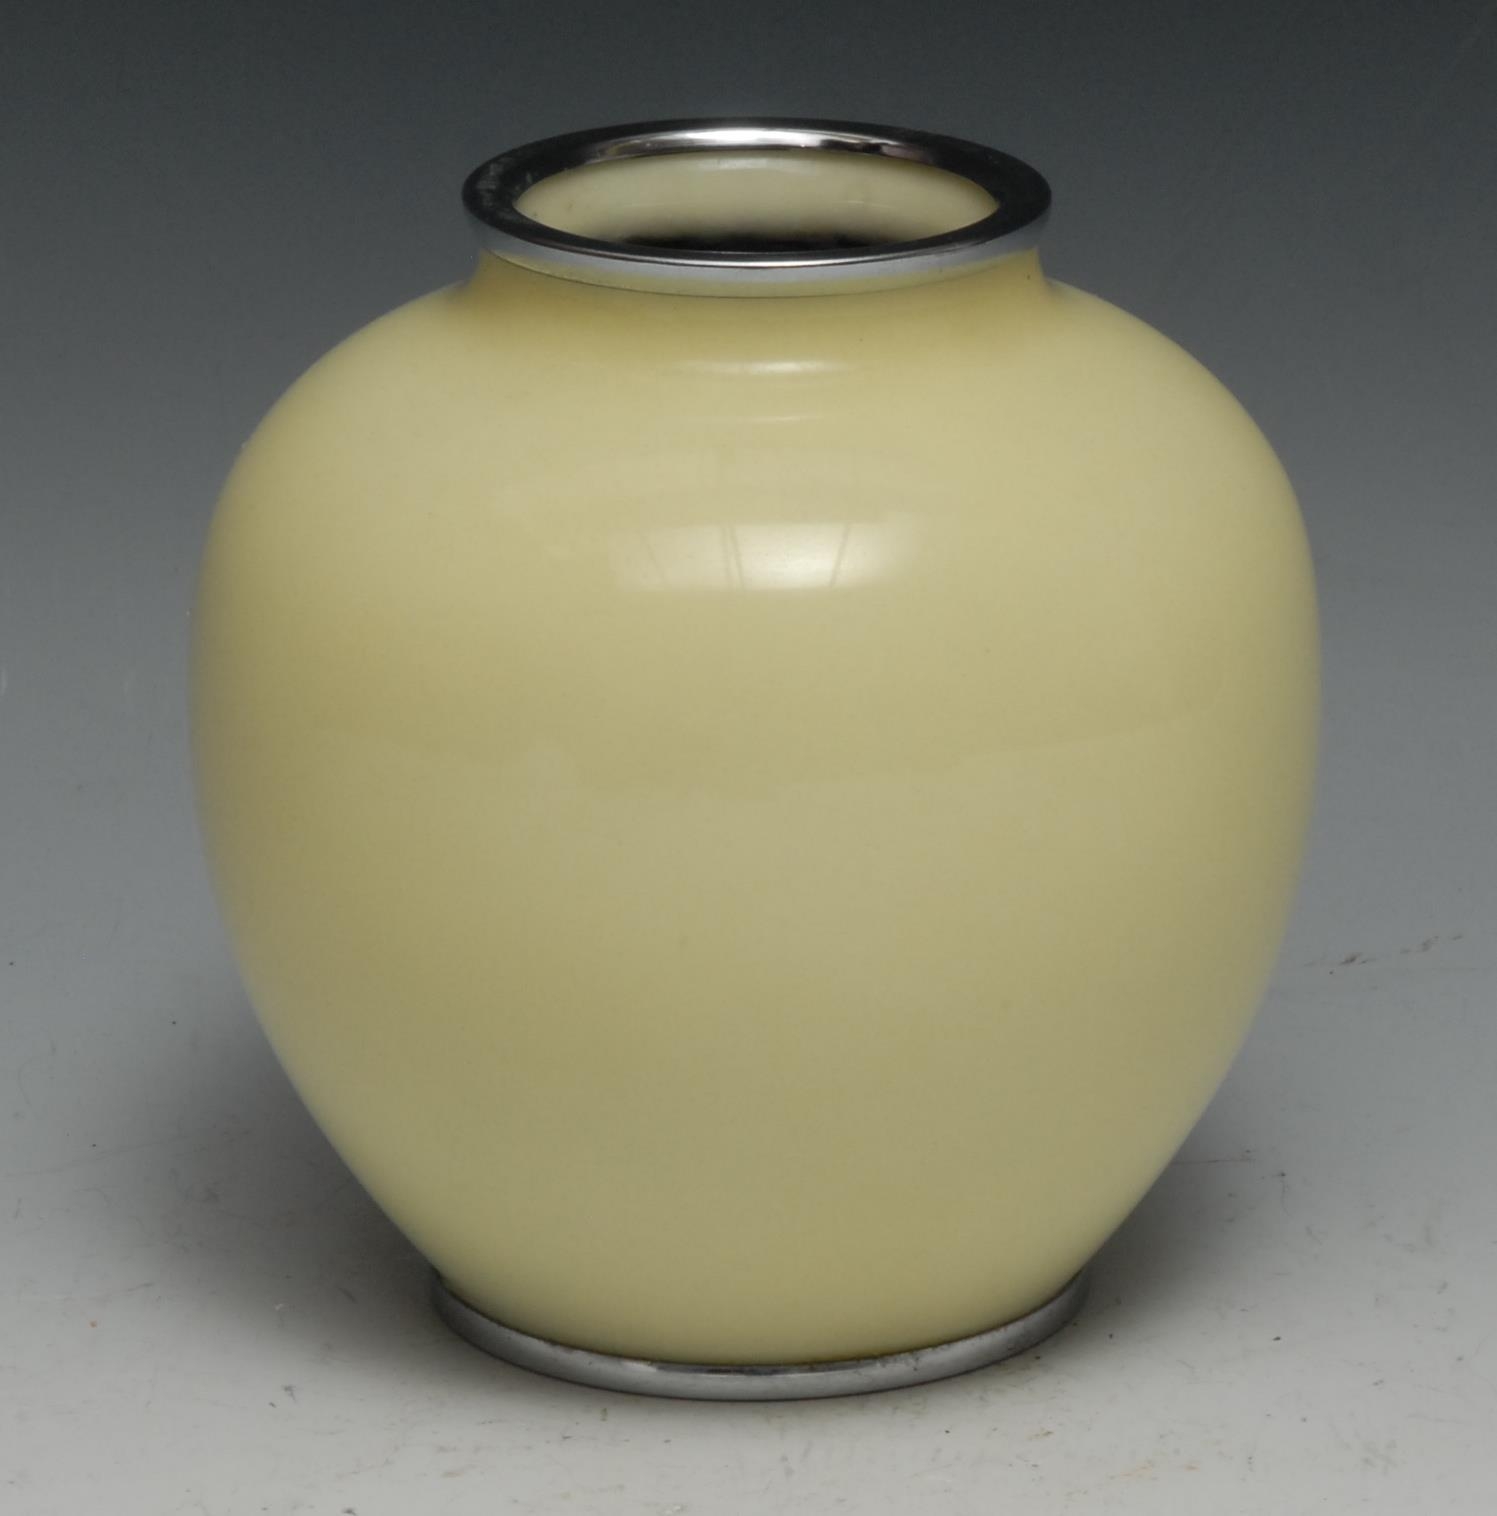 A Japanese cloisonne vase, decorated in polychrome with blossoming prunus on a pale yellow ground, - Image 2 of 2